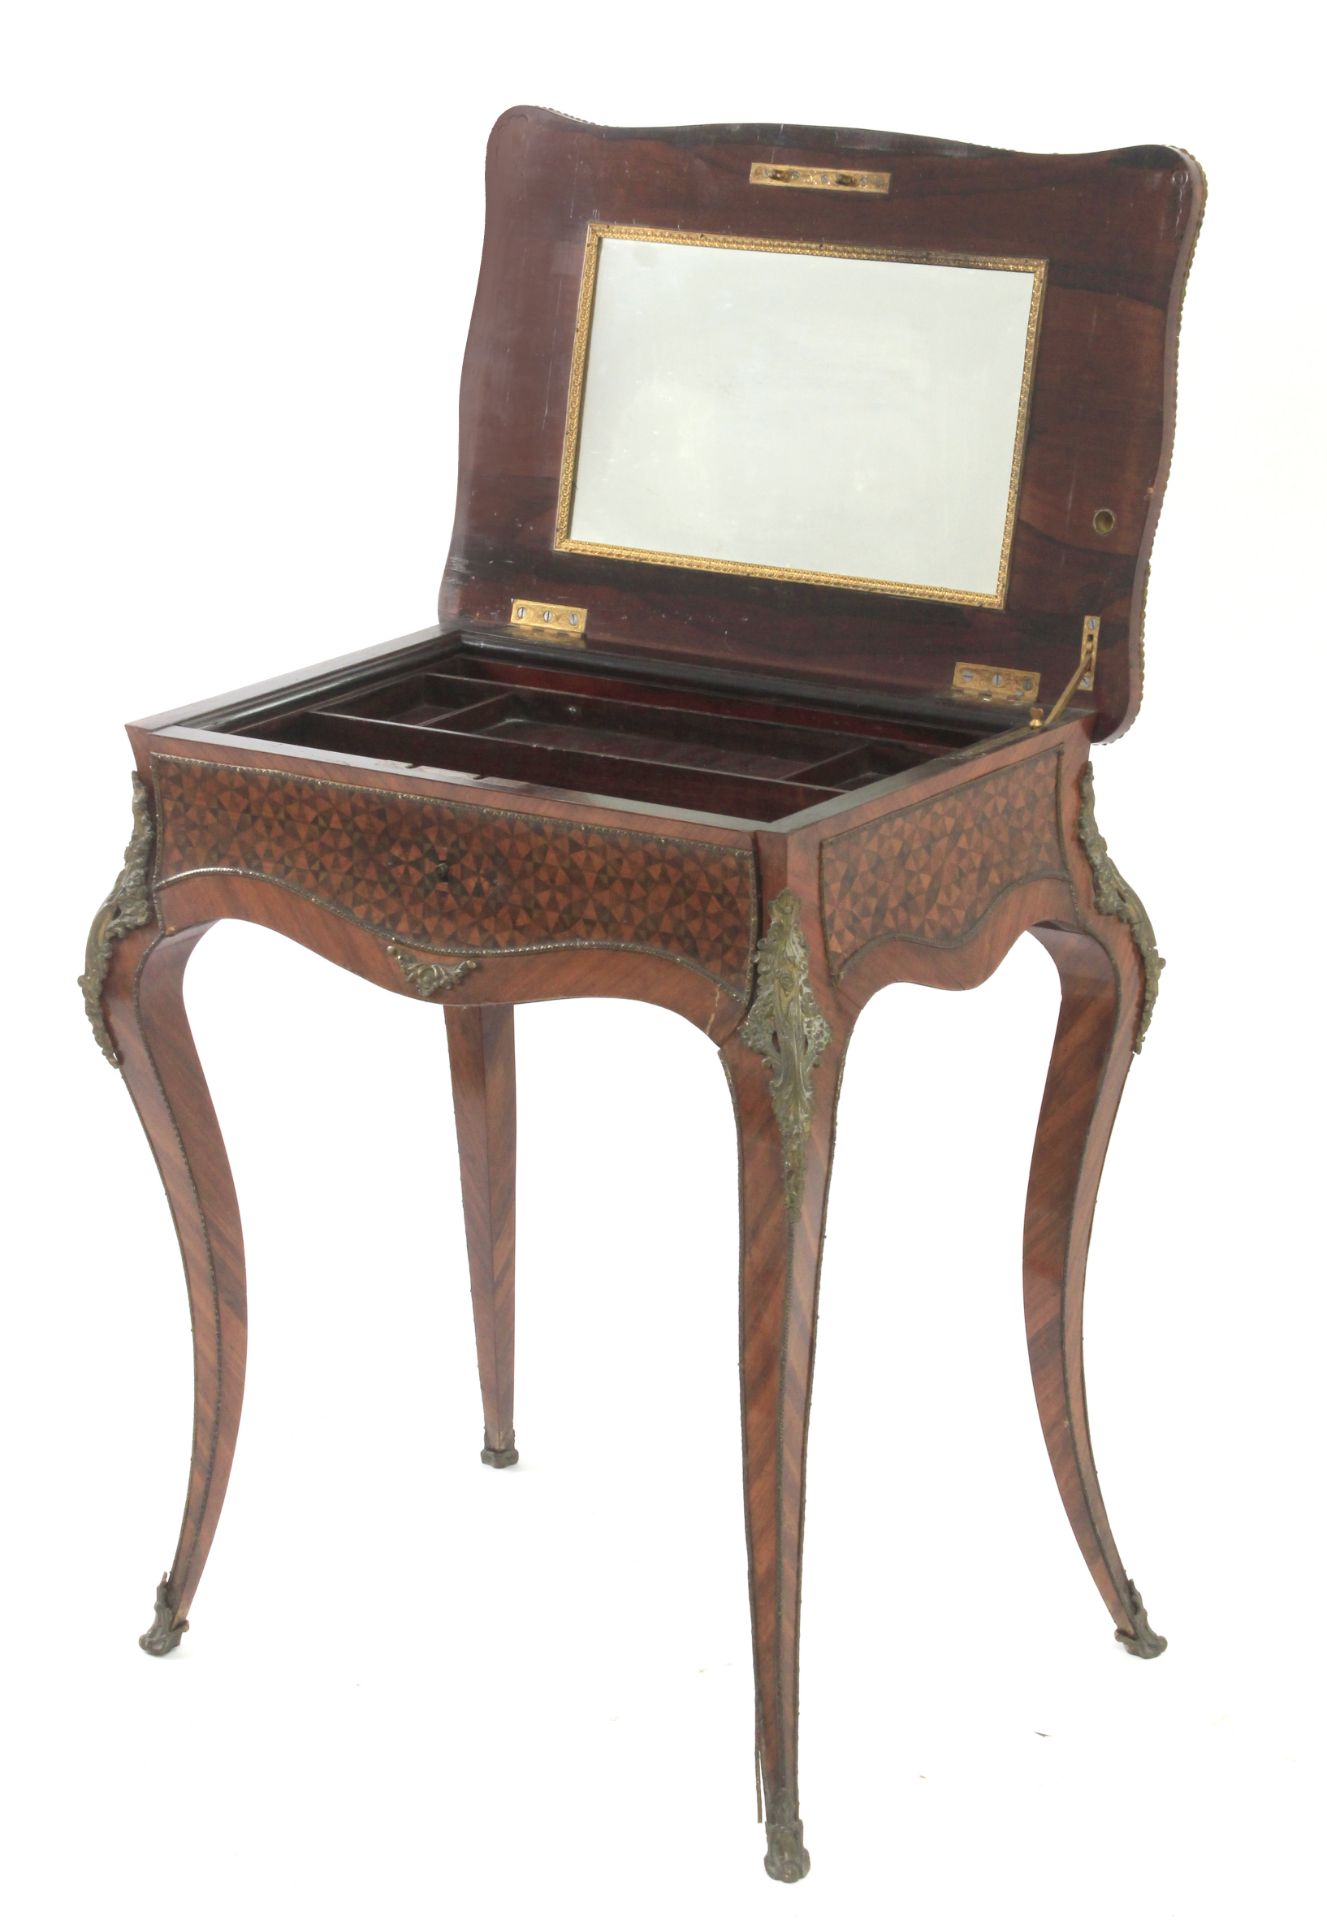 A Napoleón III style rosewood dressing table circa 1900